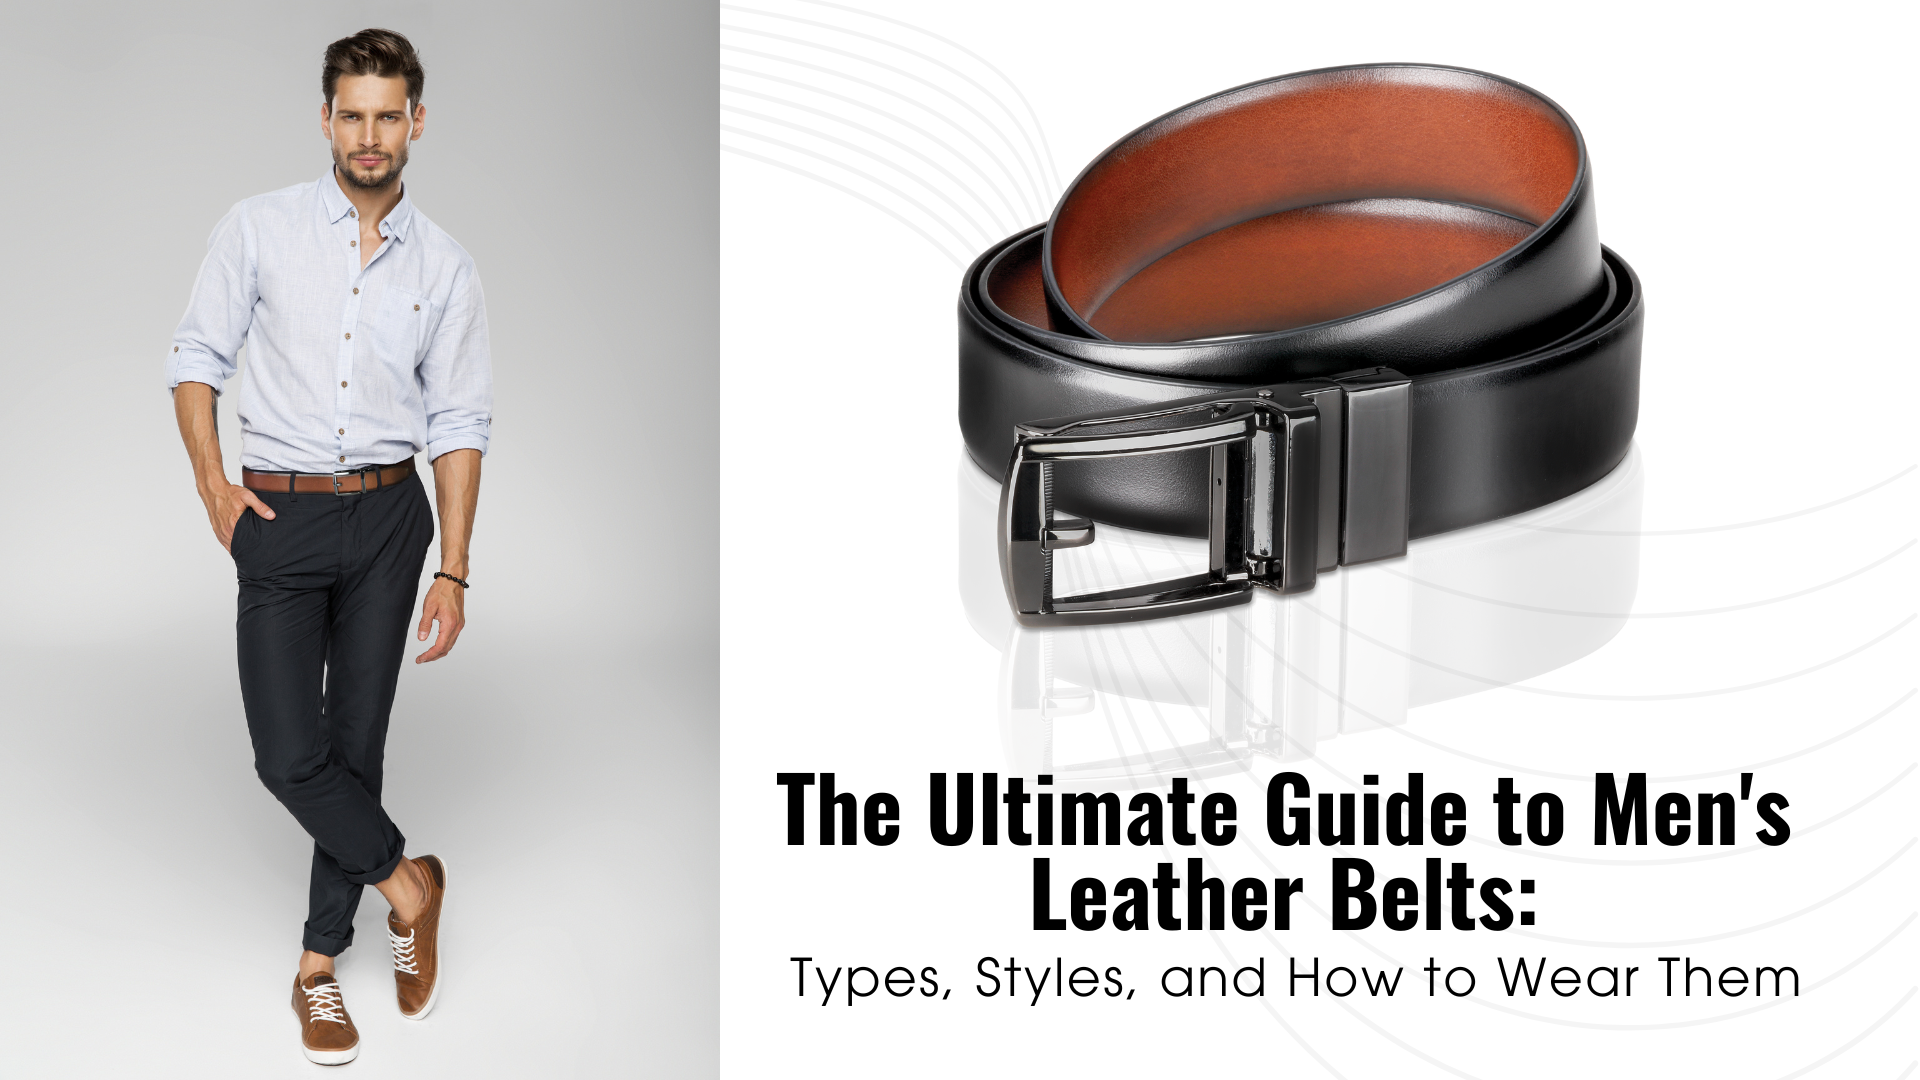 The Ultimate Guide to Men's Leather Belts: Types, Styles, and How to Wear Them